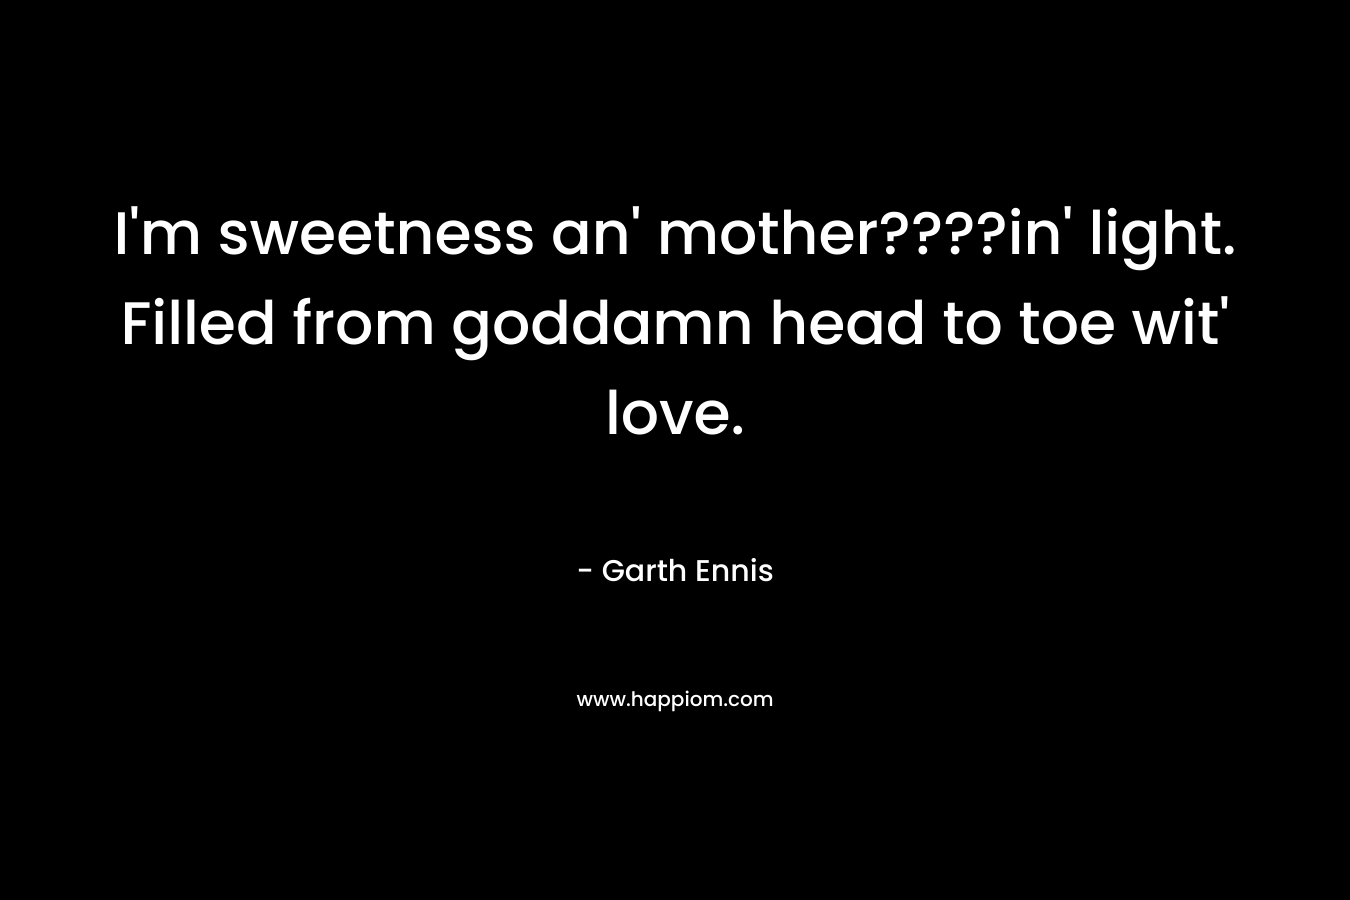 I’m sweetness an’ mother????in’ light. Filled from goddamn head to toe wit’ love. – Garth Ennis